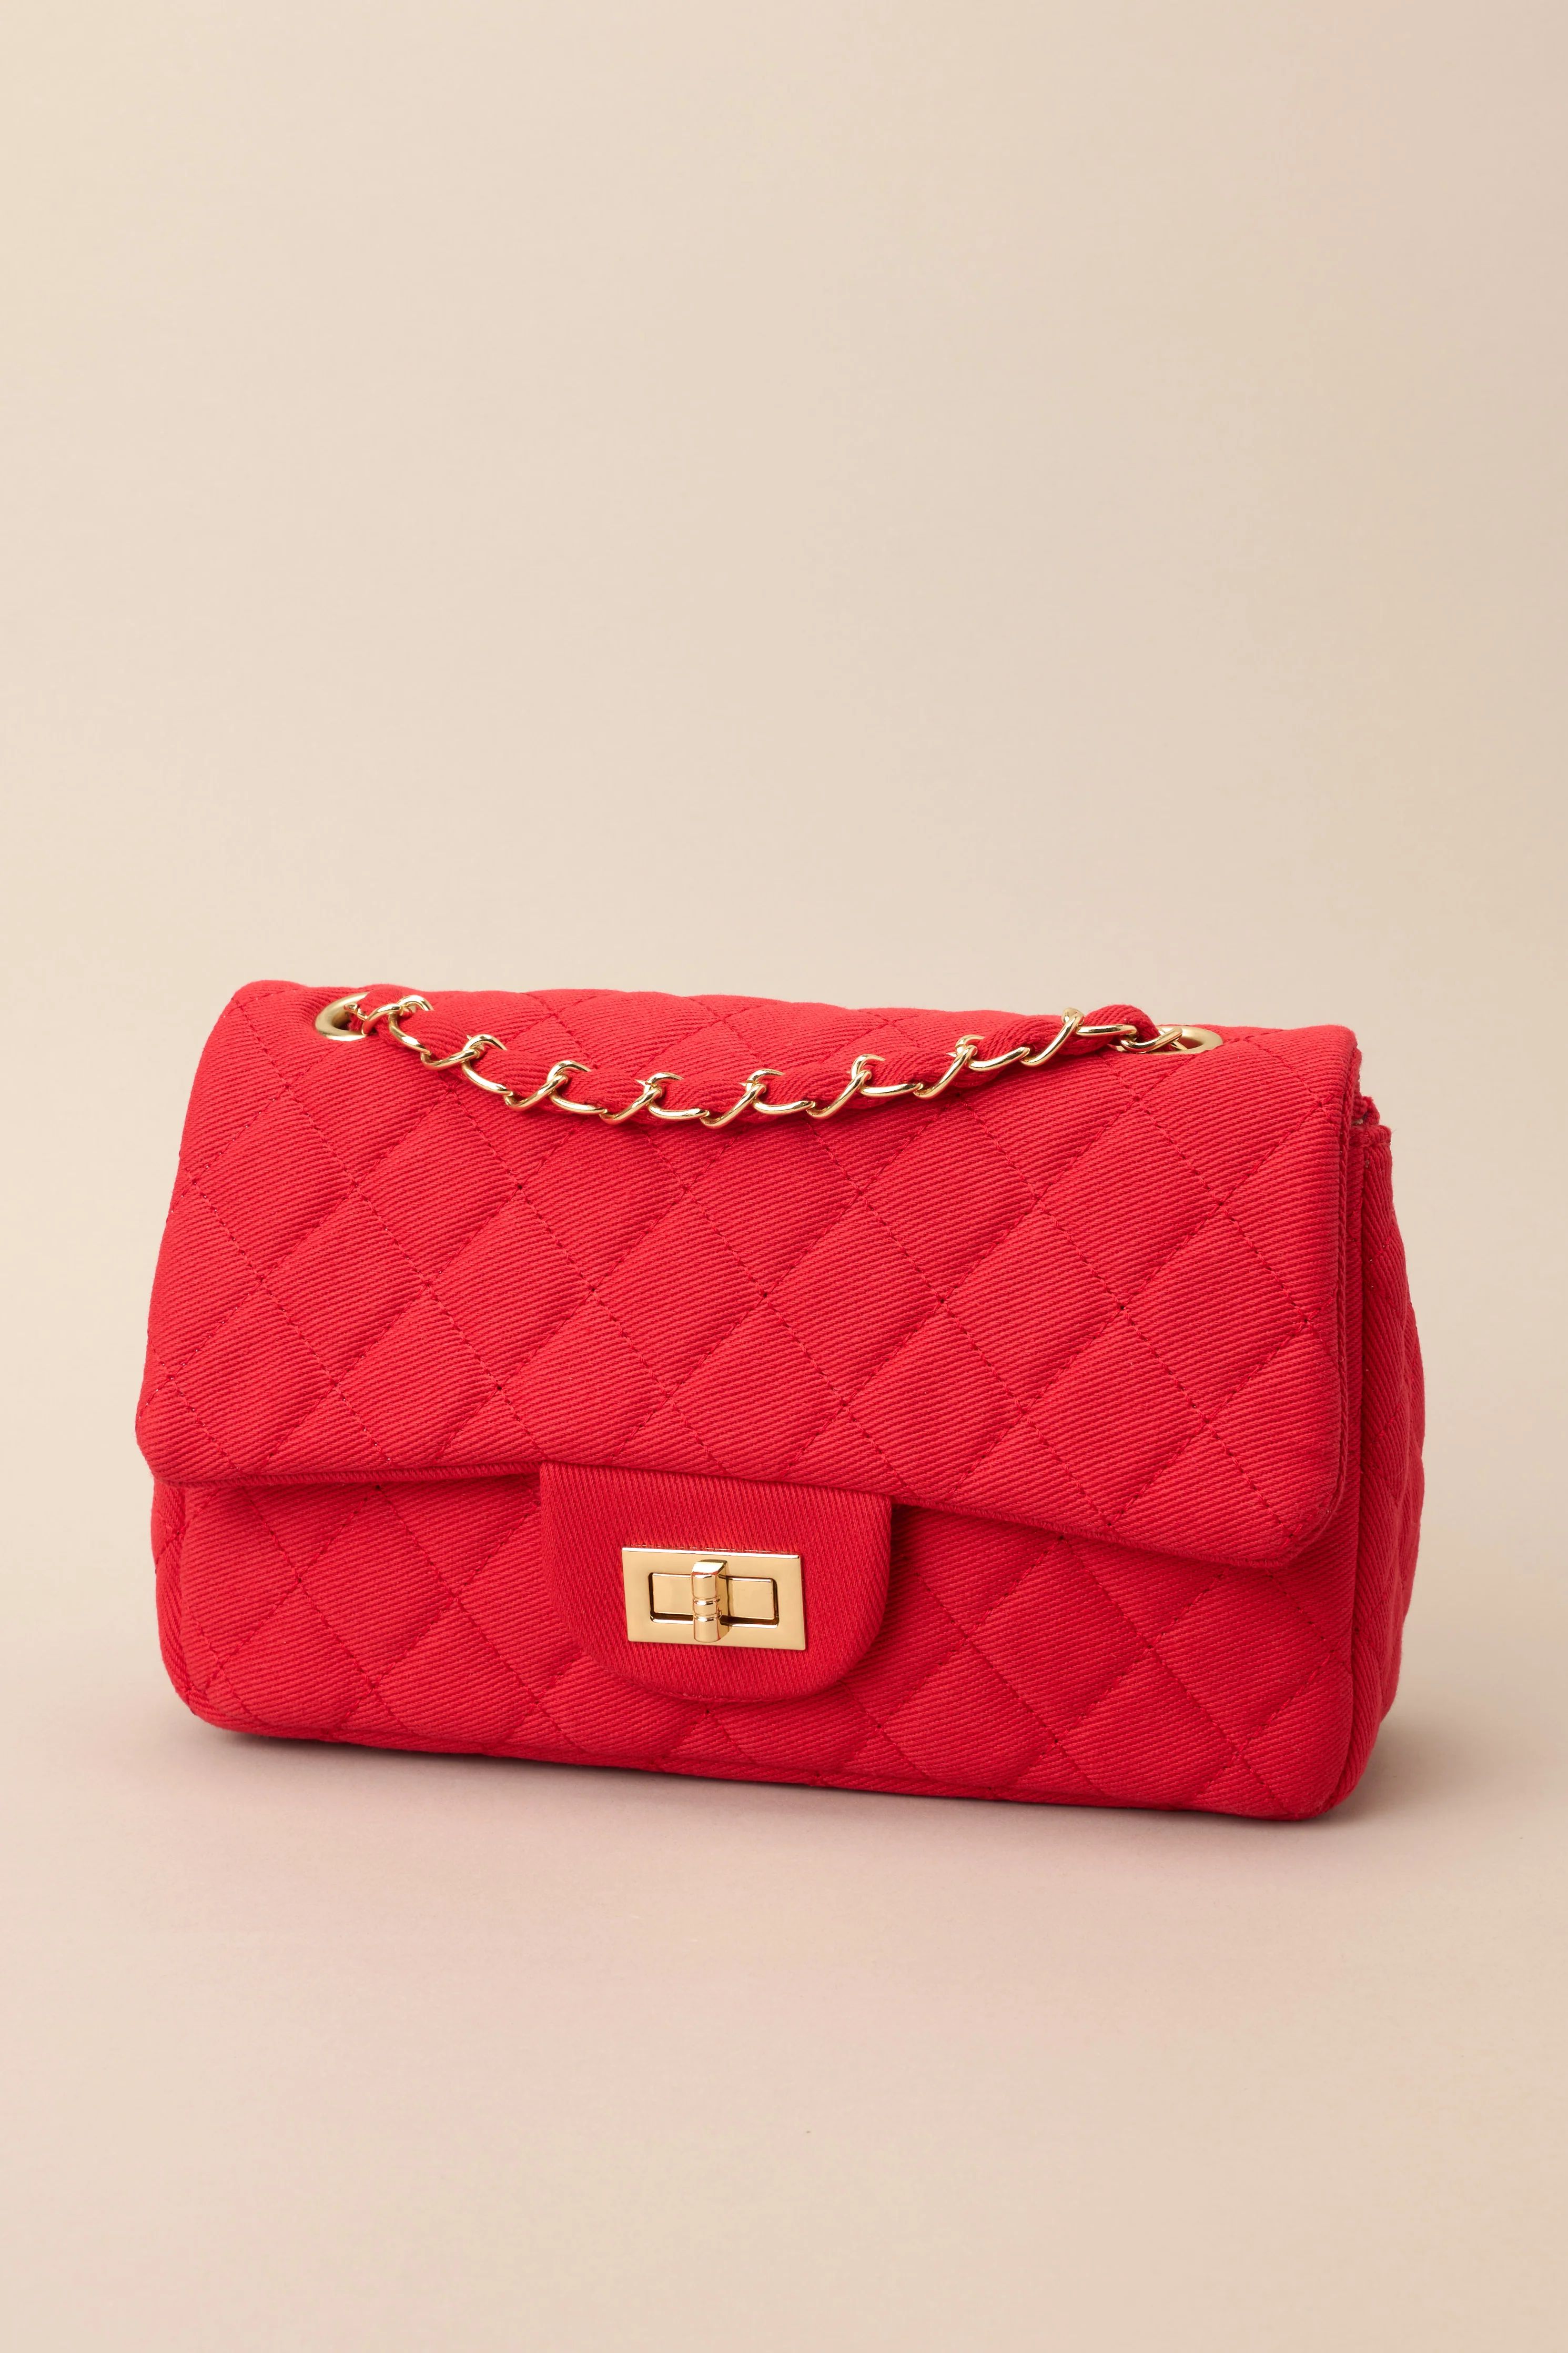 Move On Red Quilted Handbag | Red Dress 